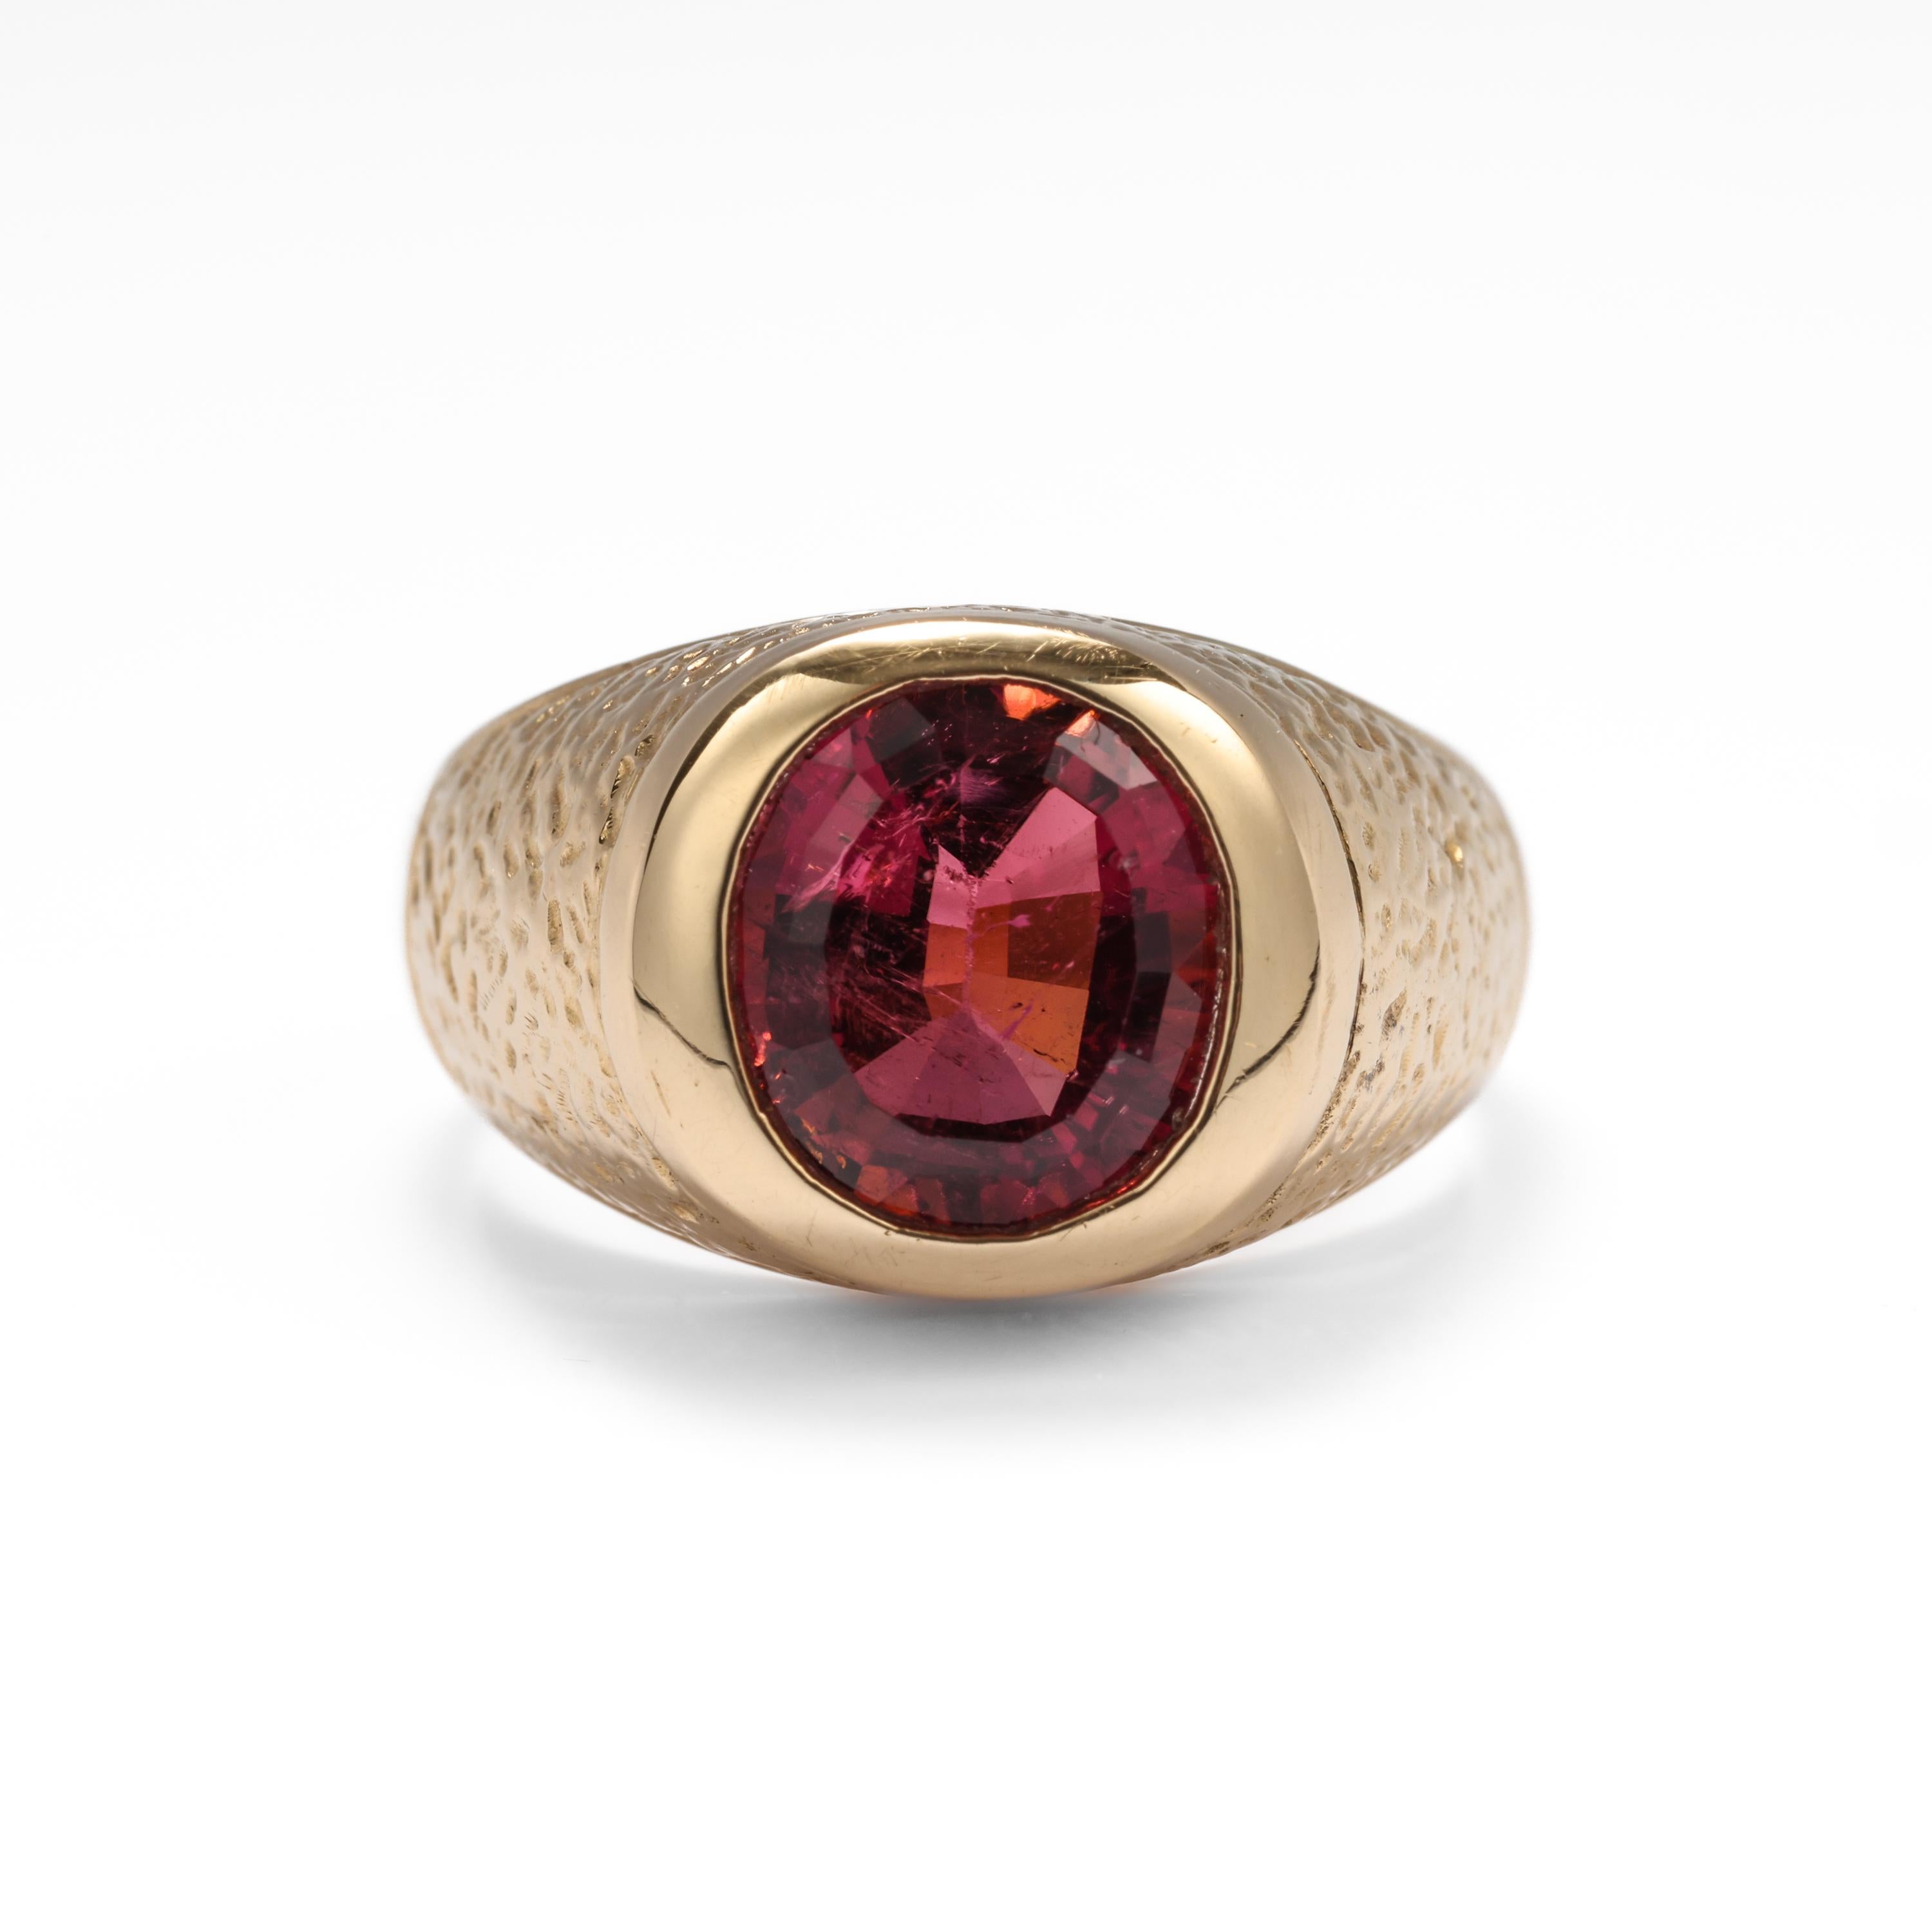 This is an impressive and substantial men's vintage tourmaline ring. The raspberry-red rubellite tourmaline ring is rendered in buttery yellow 18K gold, and weighs an impressive 12.33 grams. Dimpled detailing on both shoulders compliments the stone